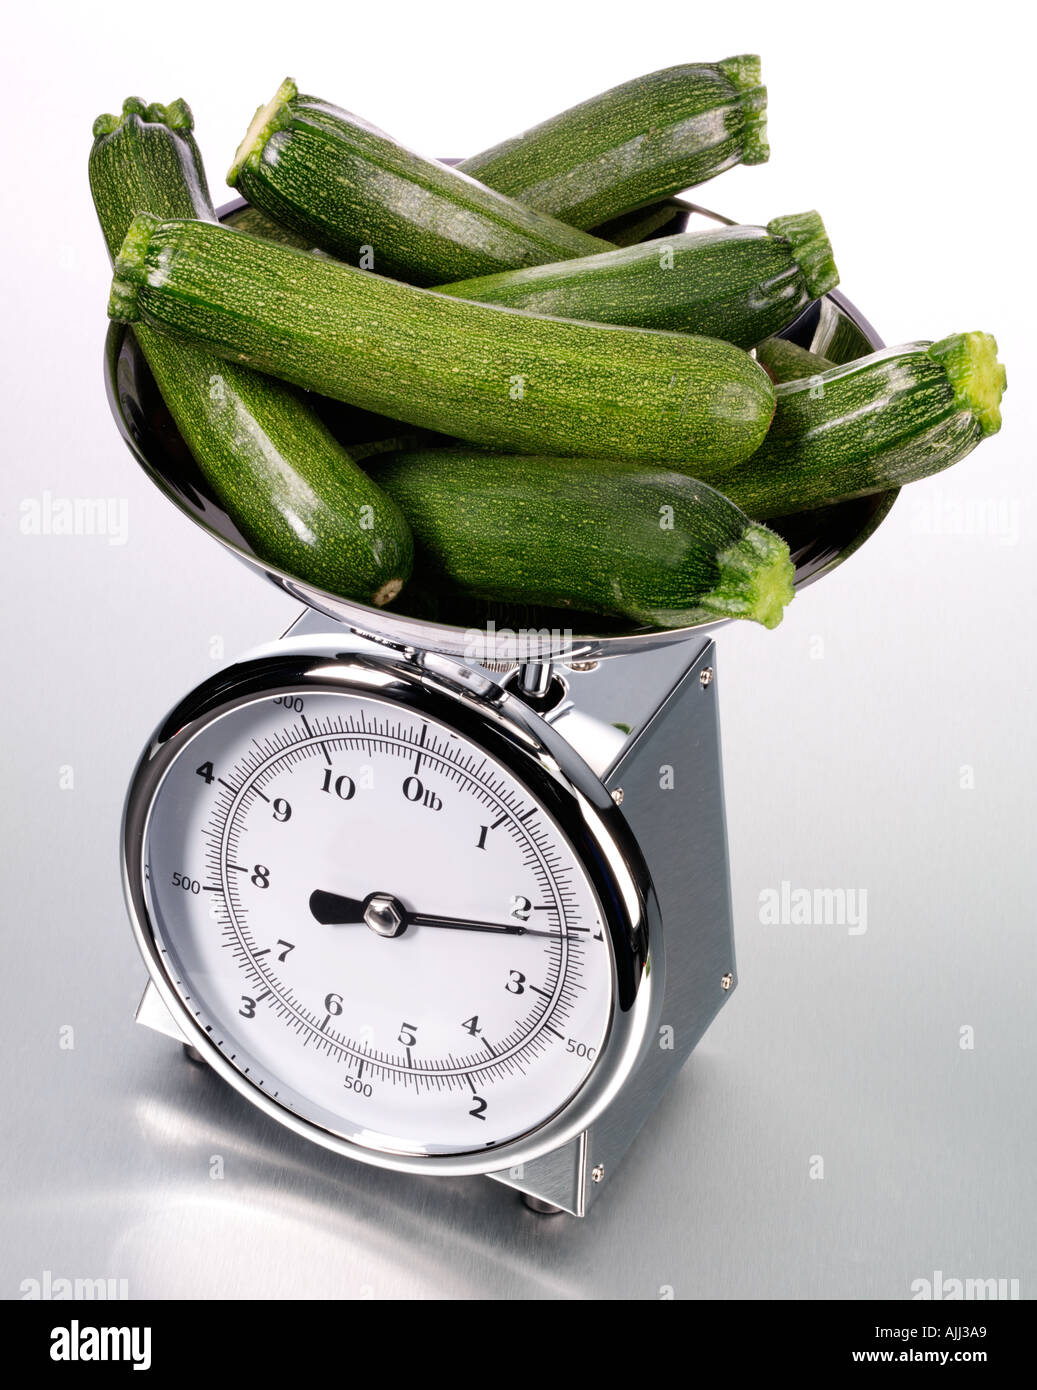 https://c8.alamy.com/comp/AJJ3A9/kitchen-scales-with-courgettes-zucchini-AJJ3A9.jpg